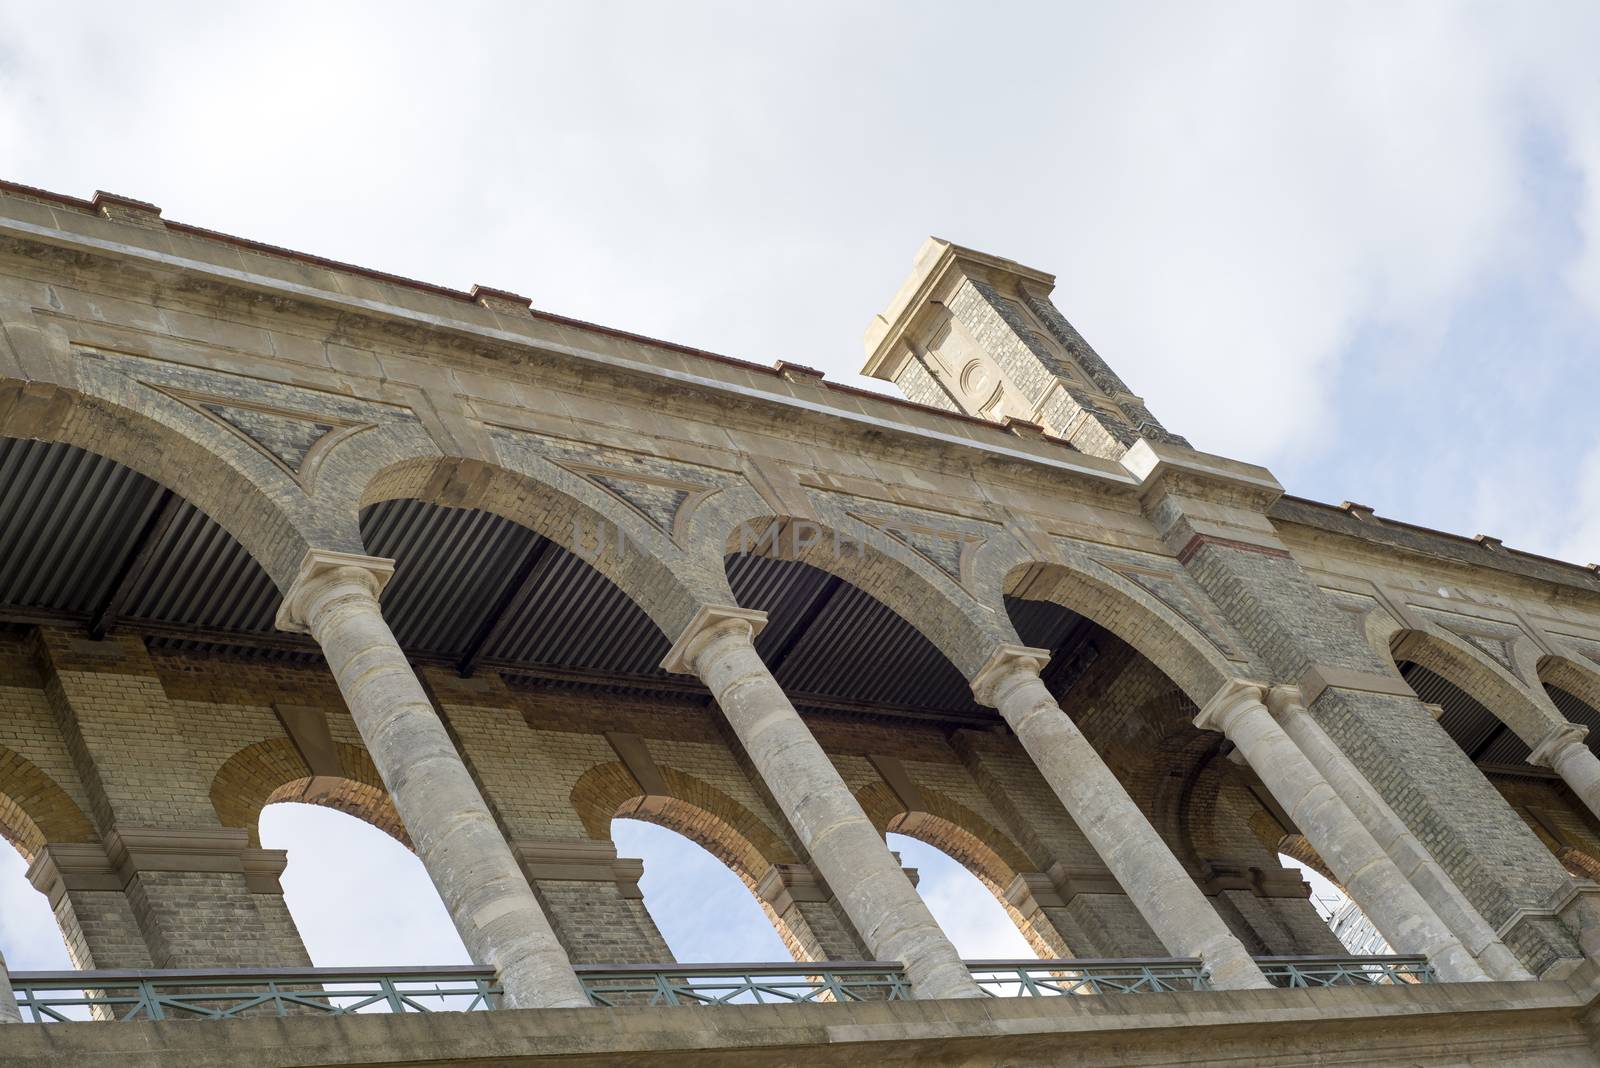 alexandra palace arches by morrbyte